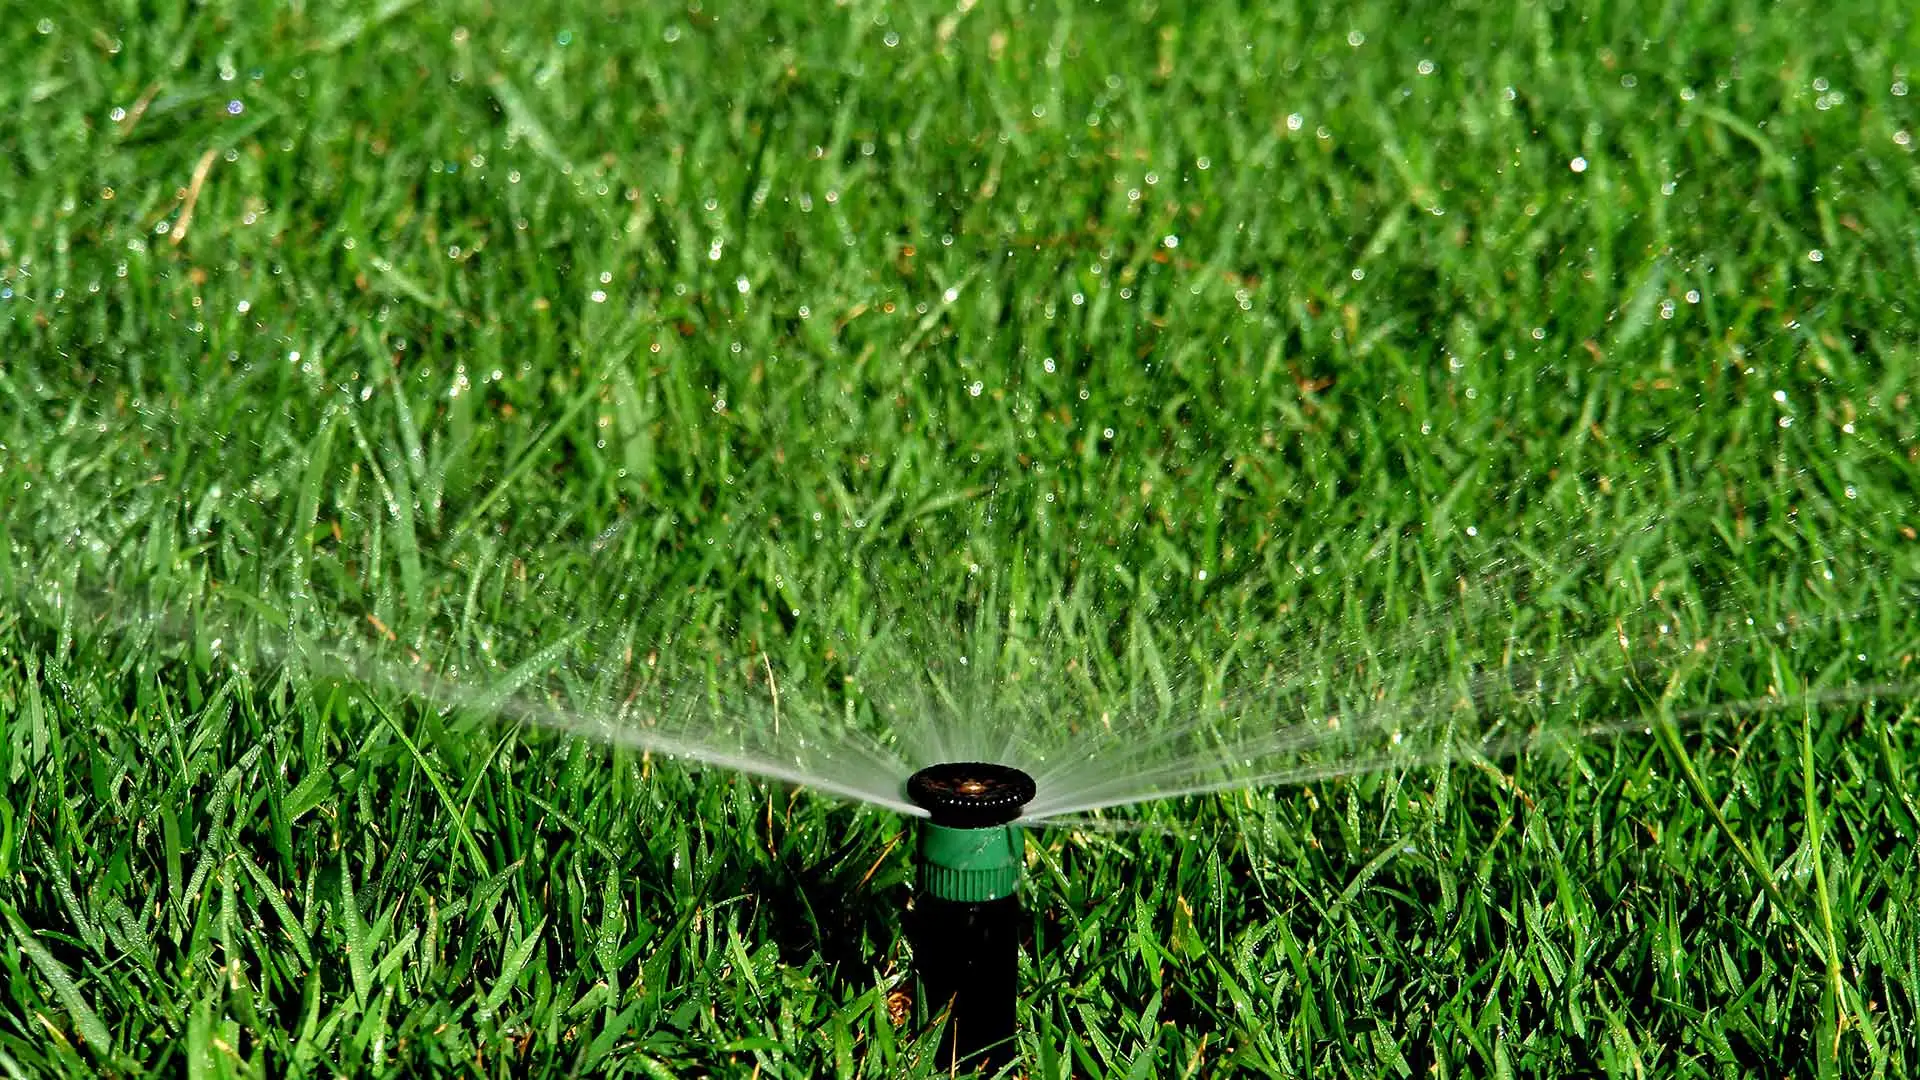 An irrigation sprinkler head watering a lawn near The Villages, FL.